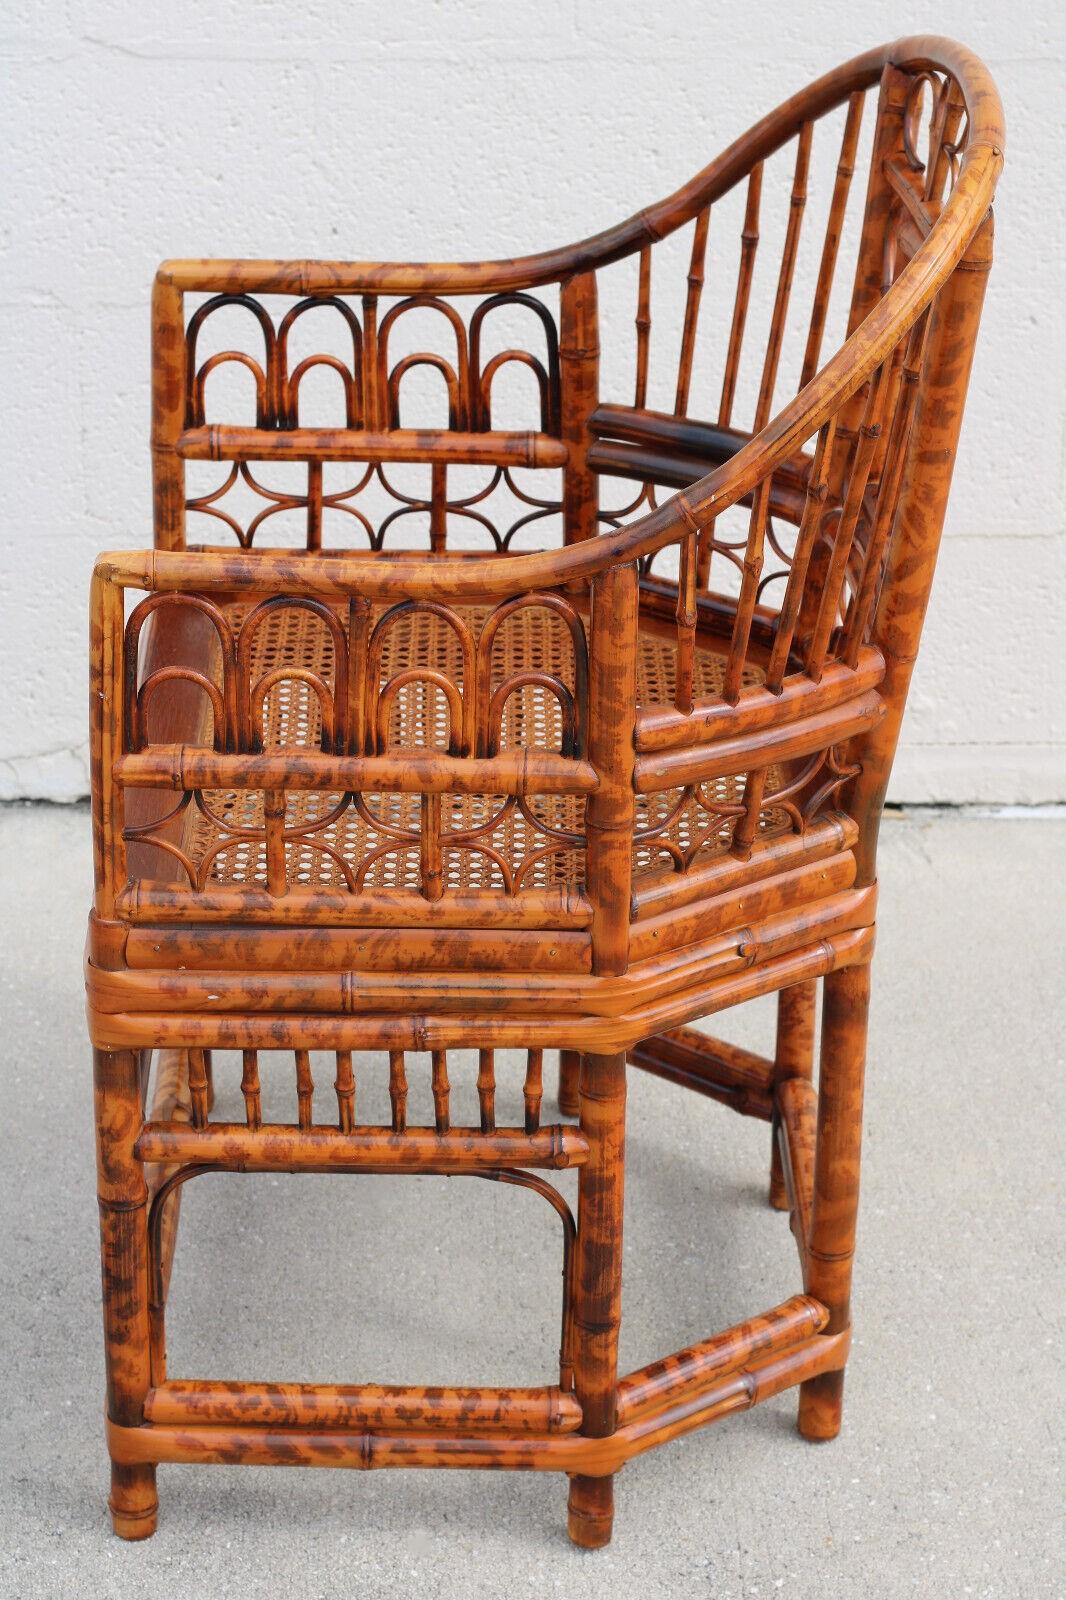 Brighton Pavilion Style Tortoiseshell Bamboo Cane Dining Armchairs, a Pair In Good Condition For Sale In Vero Beach, FL